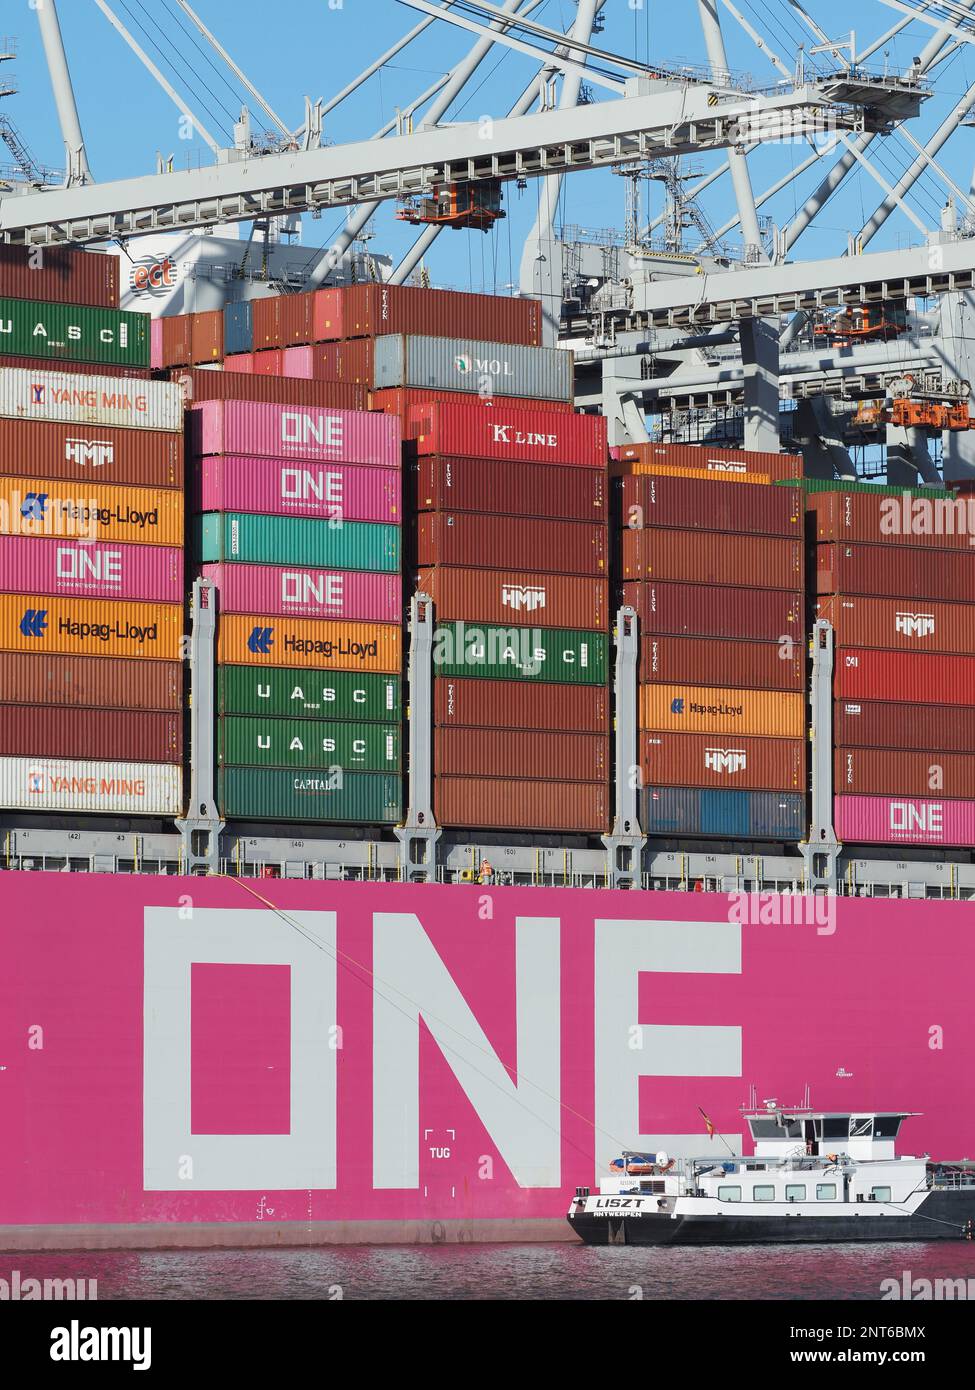 https://c8.alamy.com/comp/2NT6BMX/large-pink-container-ship-from-the-japanese-one-ocean-network-express-with-small-fuel-ship-next-to-it-in-the-port-of-rotterdam-the-netherlands-there-2NT6BMX.jpg